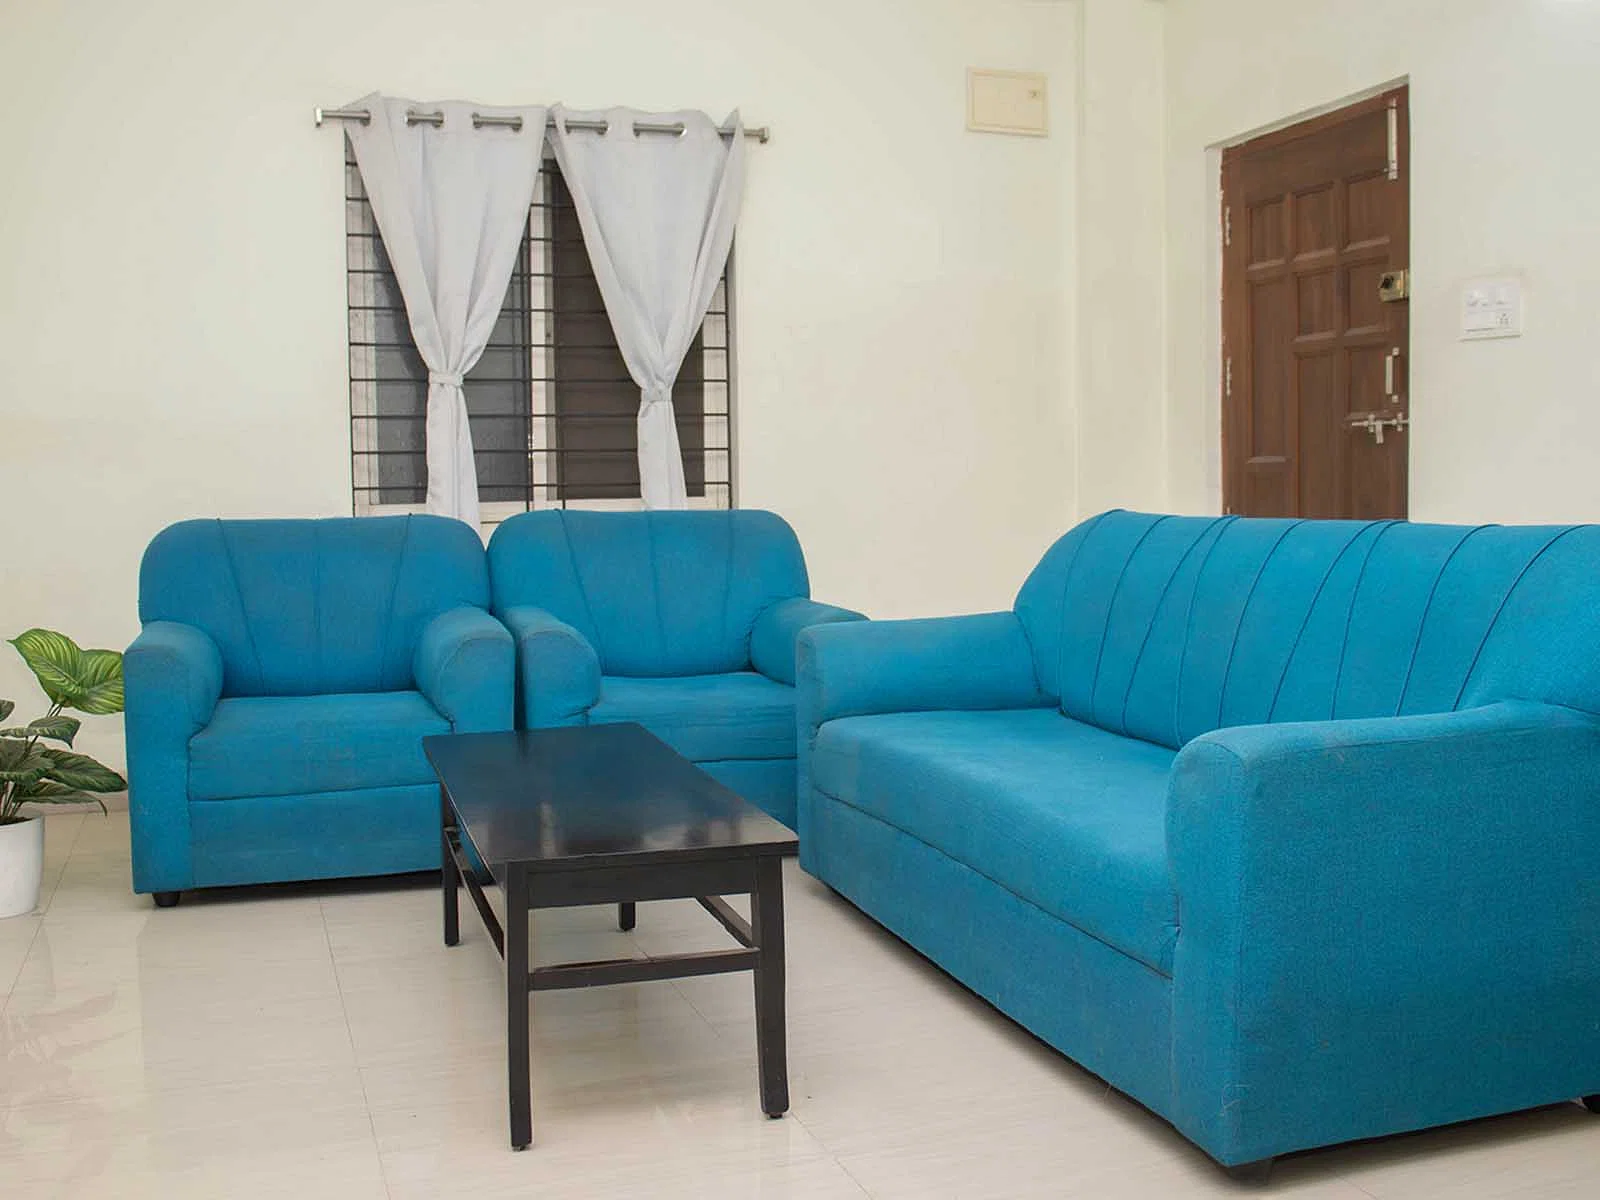 pgs in KPHB with Daily housekeeping facilities and free Wi-Fi-Zolo Grit